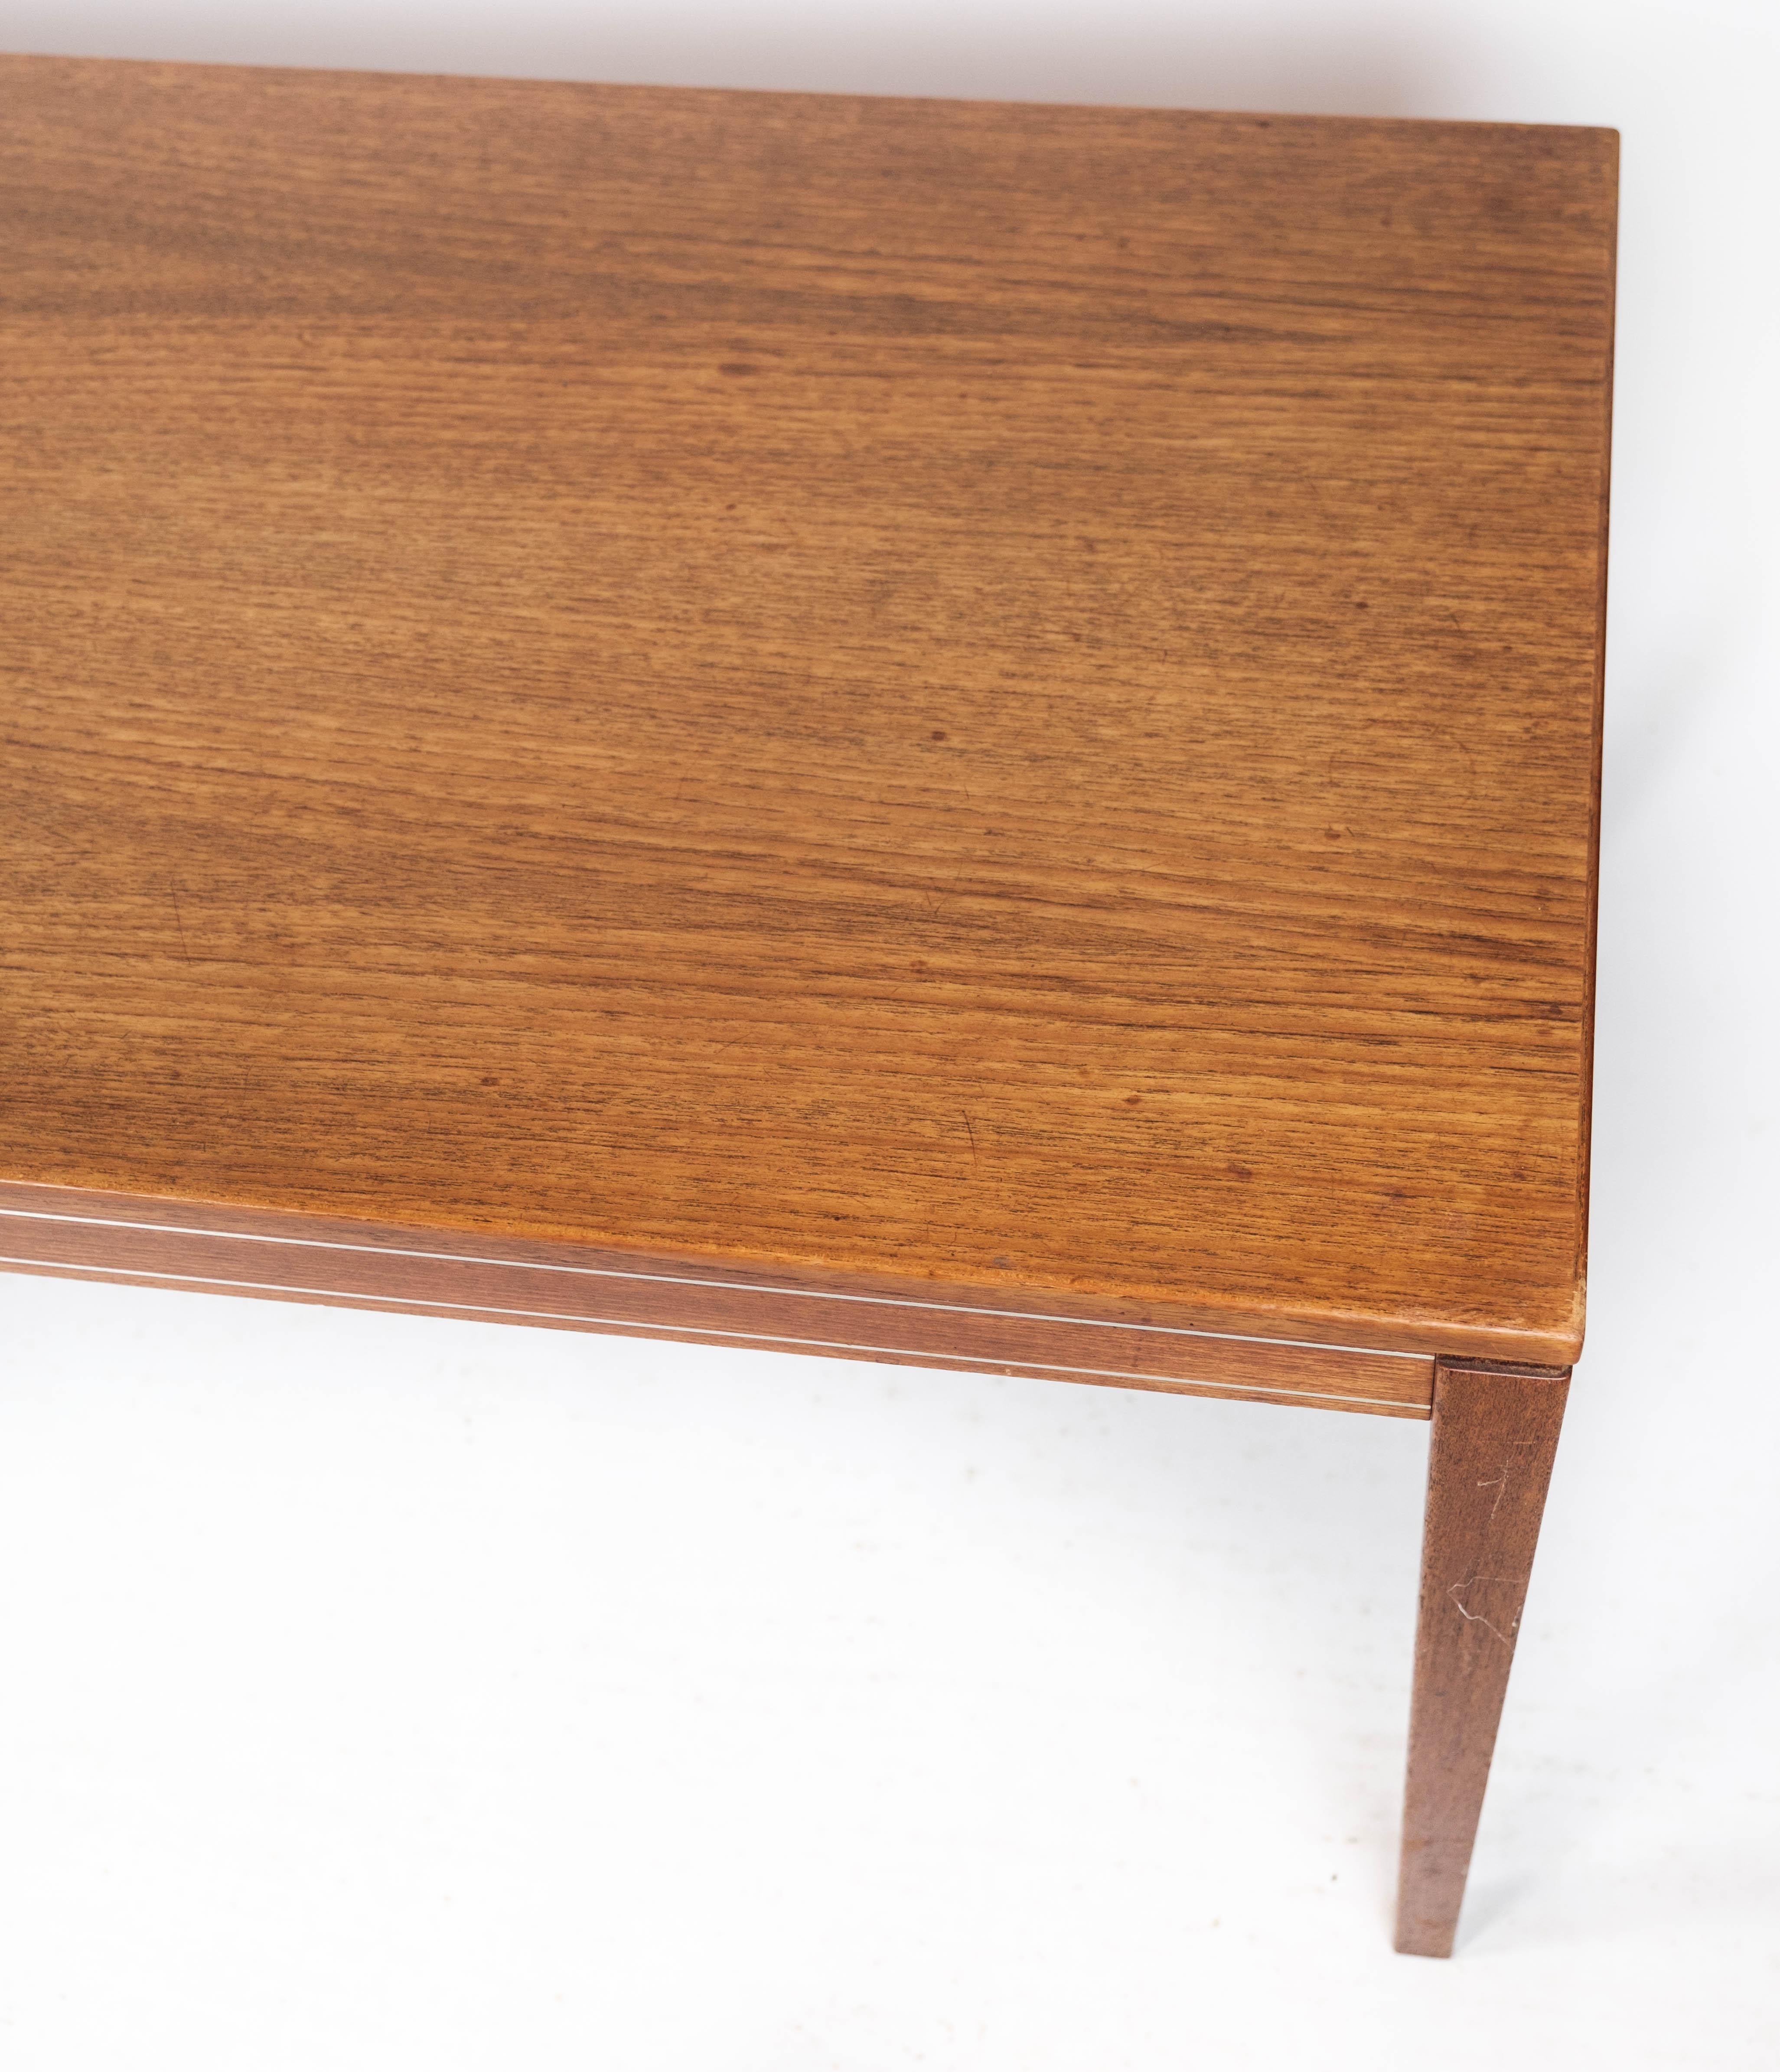 The coffee table, crafted from rosewood and featuring Danish design from the 1960s, epitomizes the elegance and sophistication of mid-century modern furniture.

Constructed from rosewood, prized for its rich color and distinctive grain patterns,